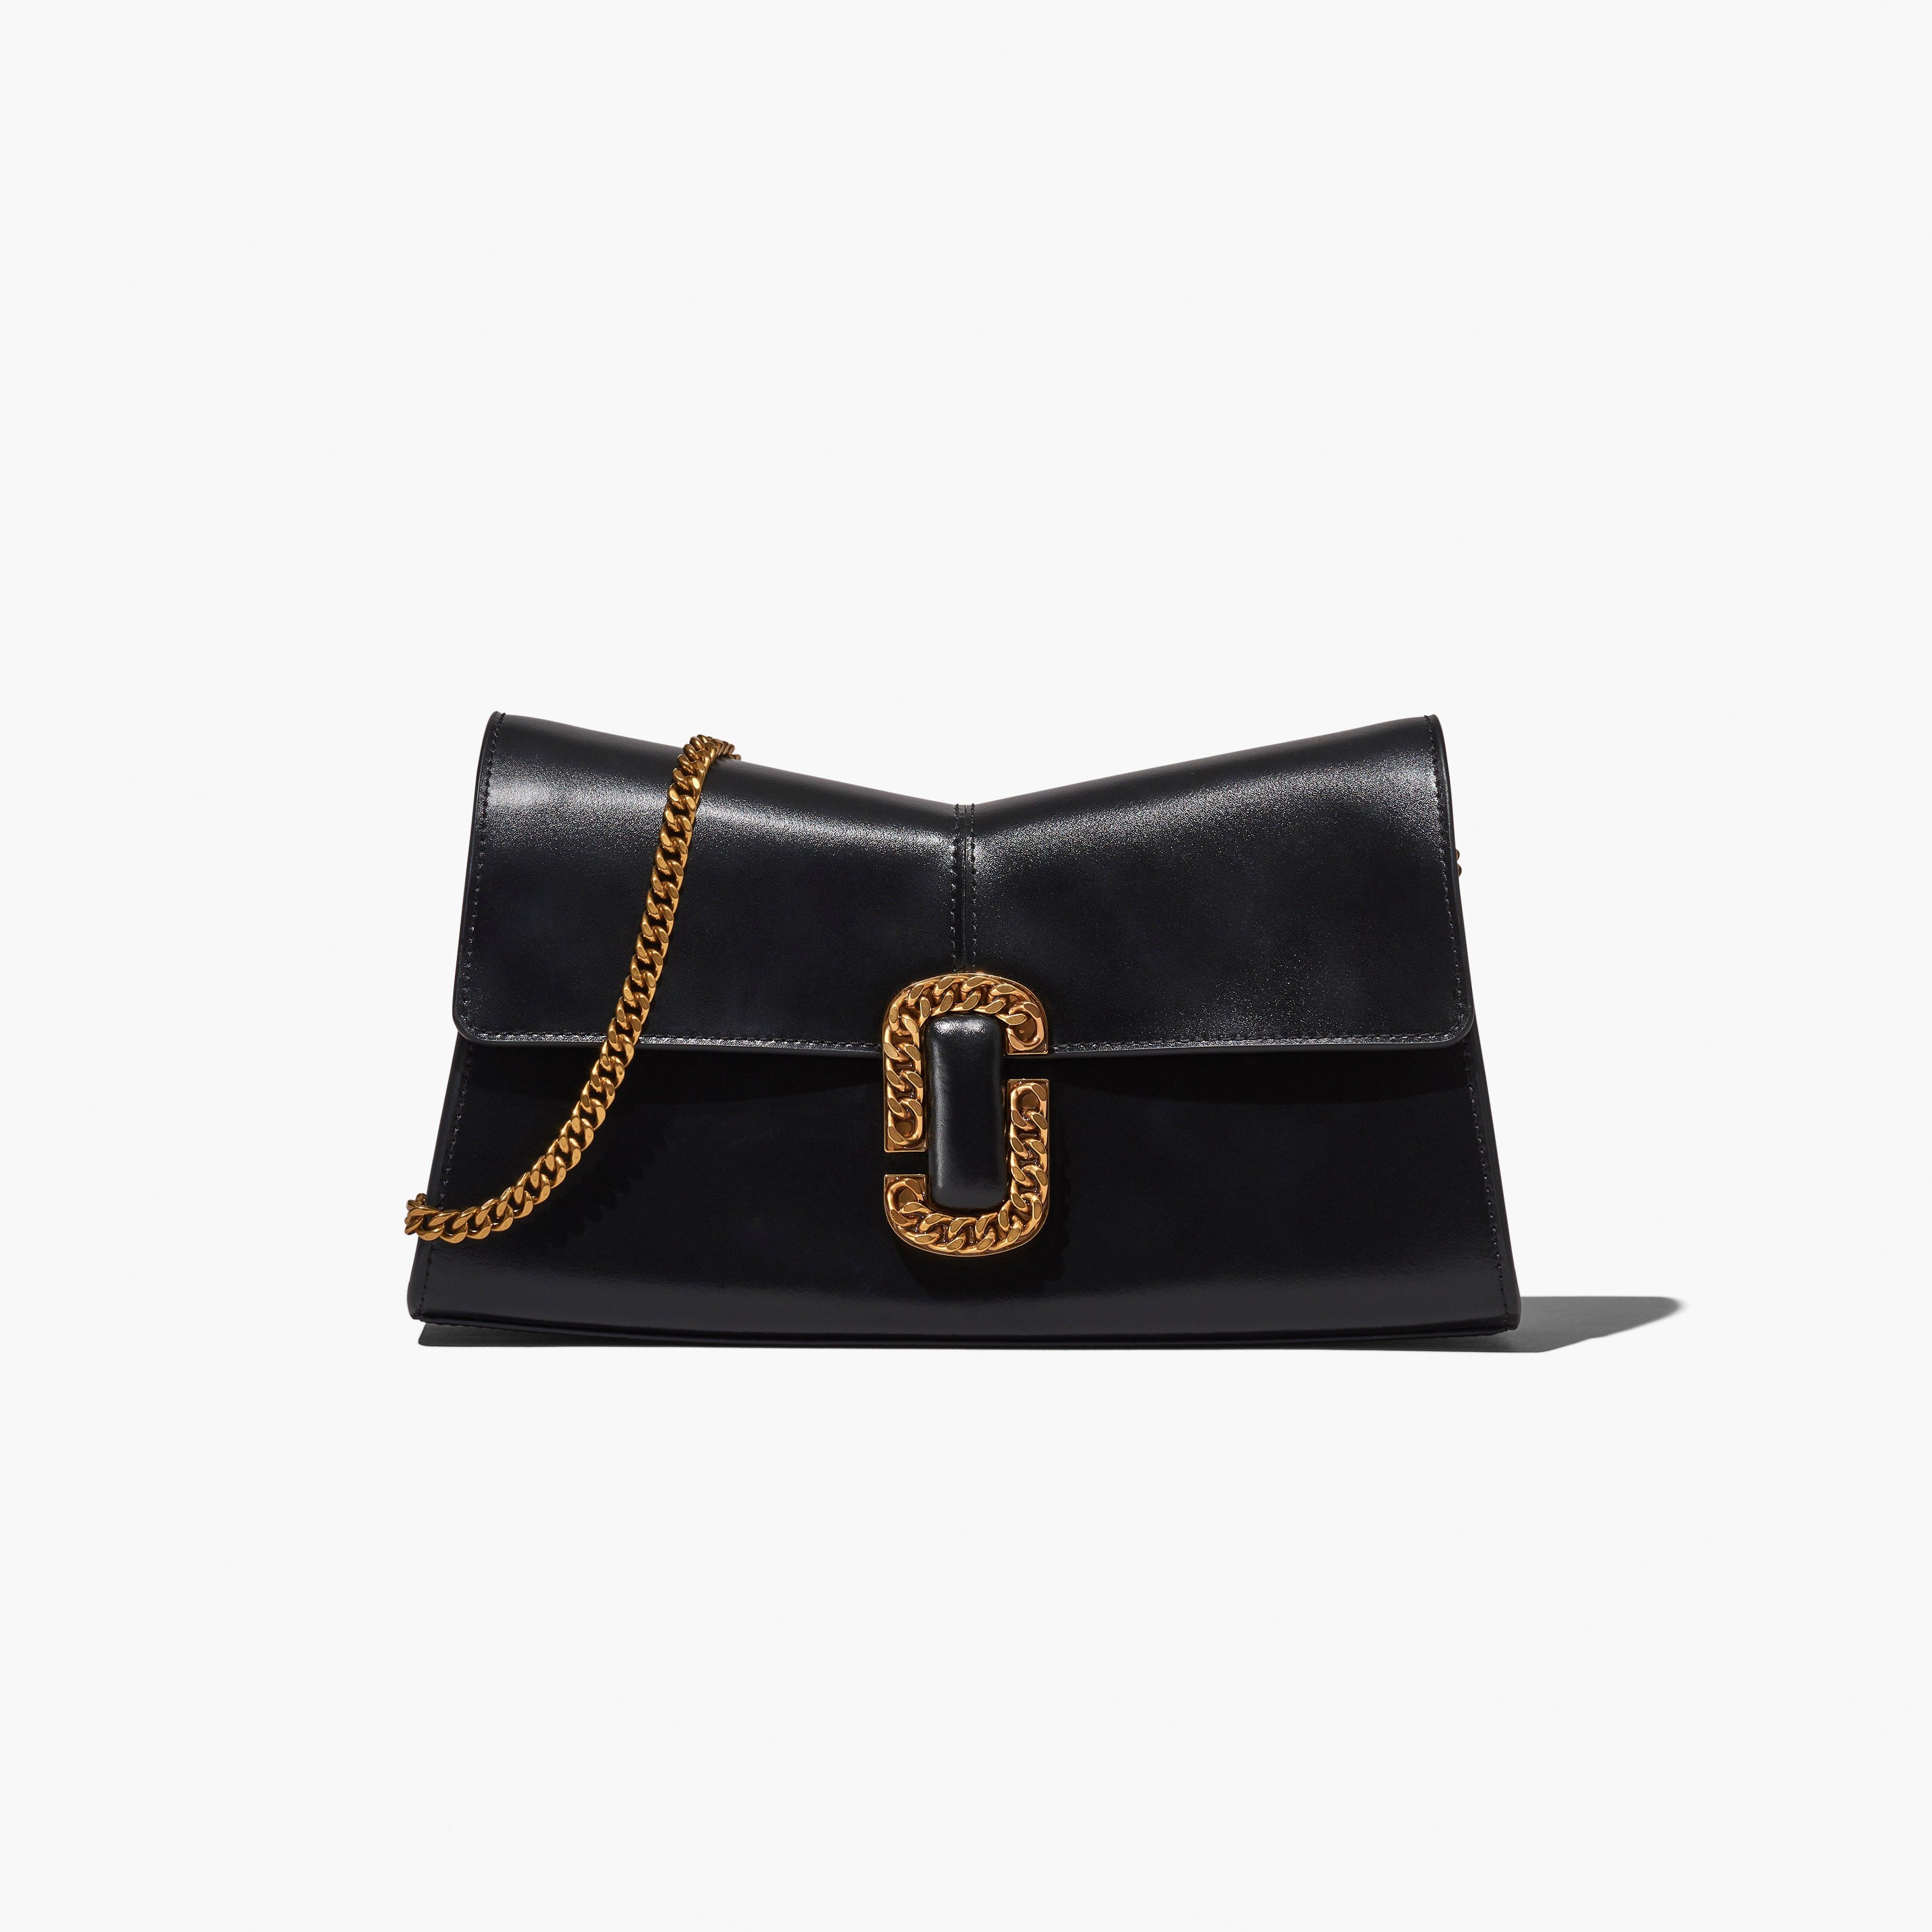 THE ST. MARC CONVERTIBLE CLUTCH - 1